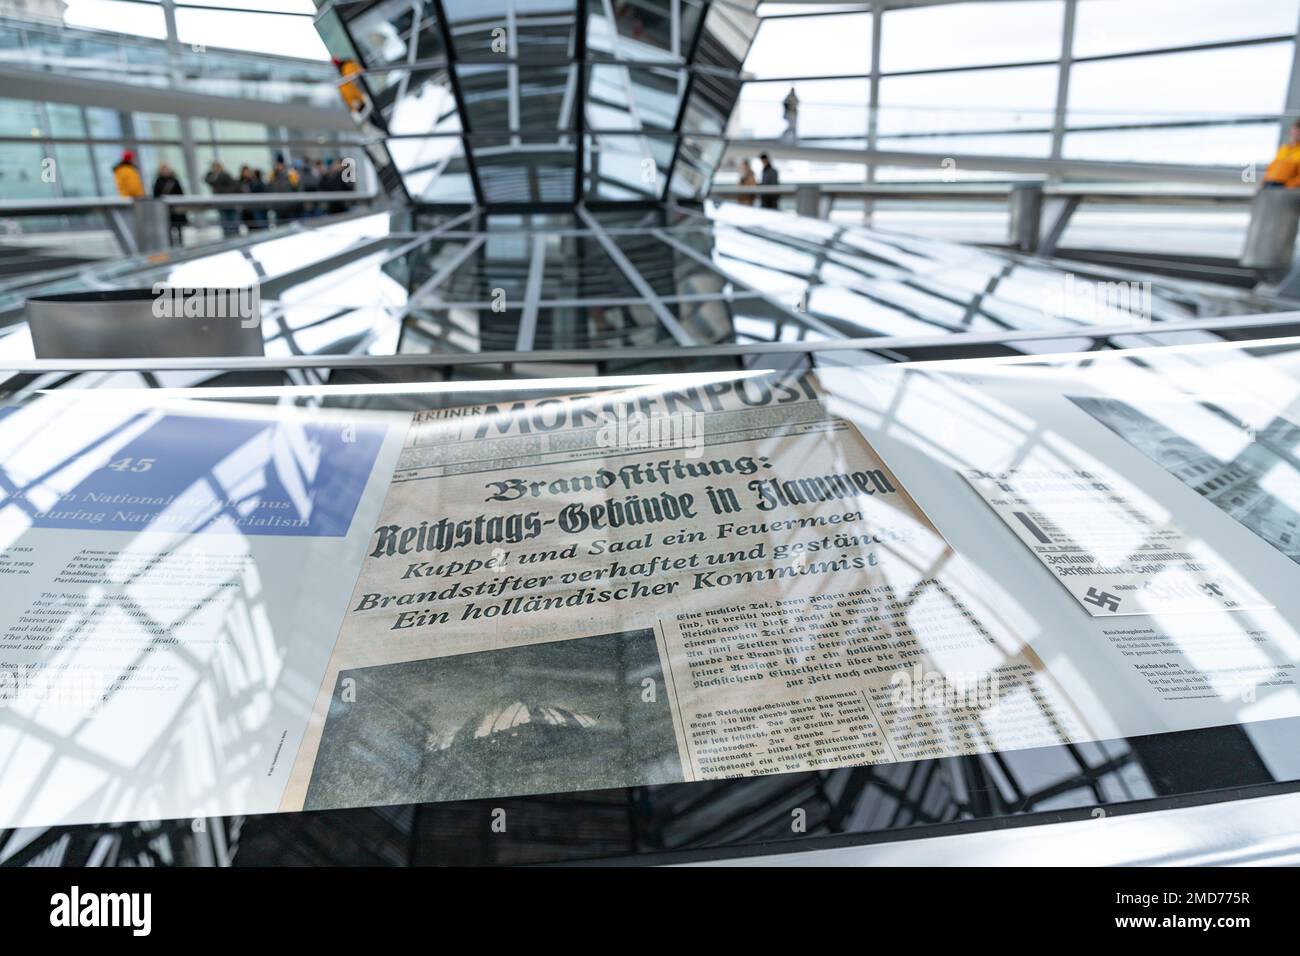 Inside Bundestag dome. Reichstag building in Berlin. Old historical photos and newspaper exhibition inside the dome of german parliament. Stock Photo